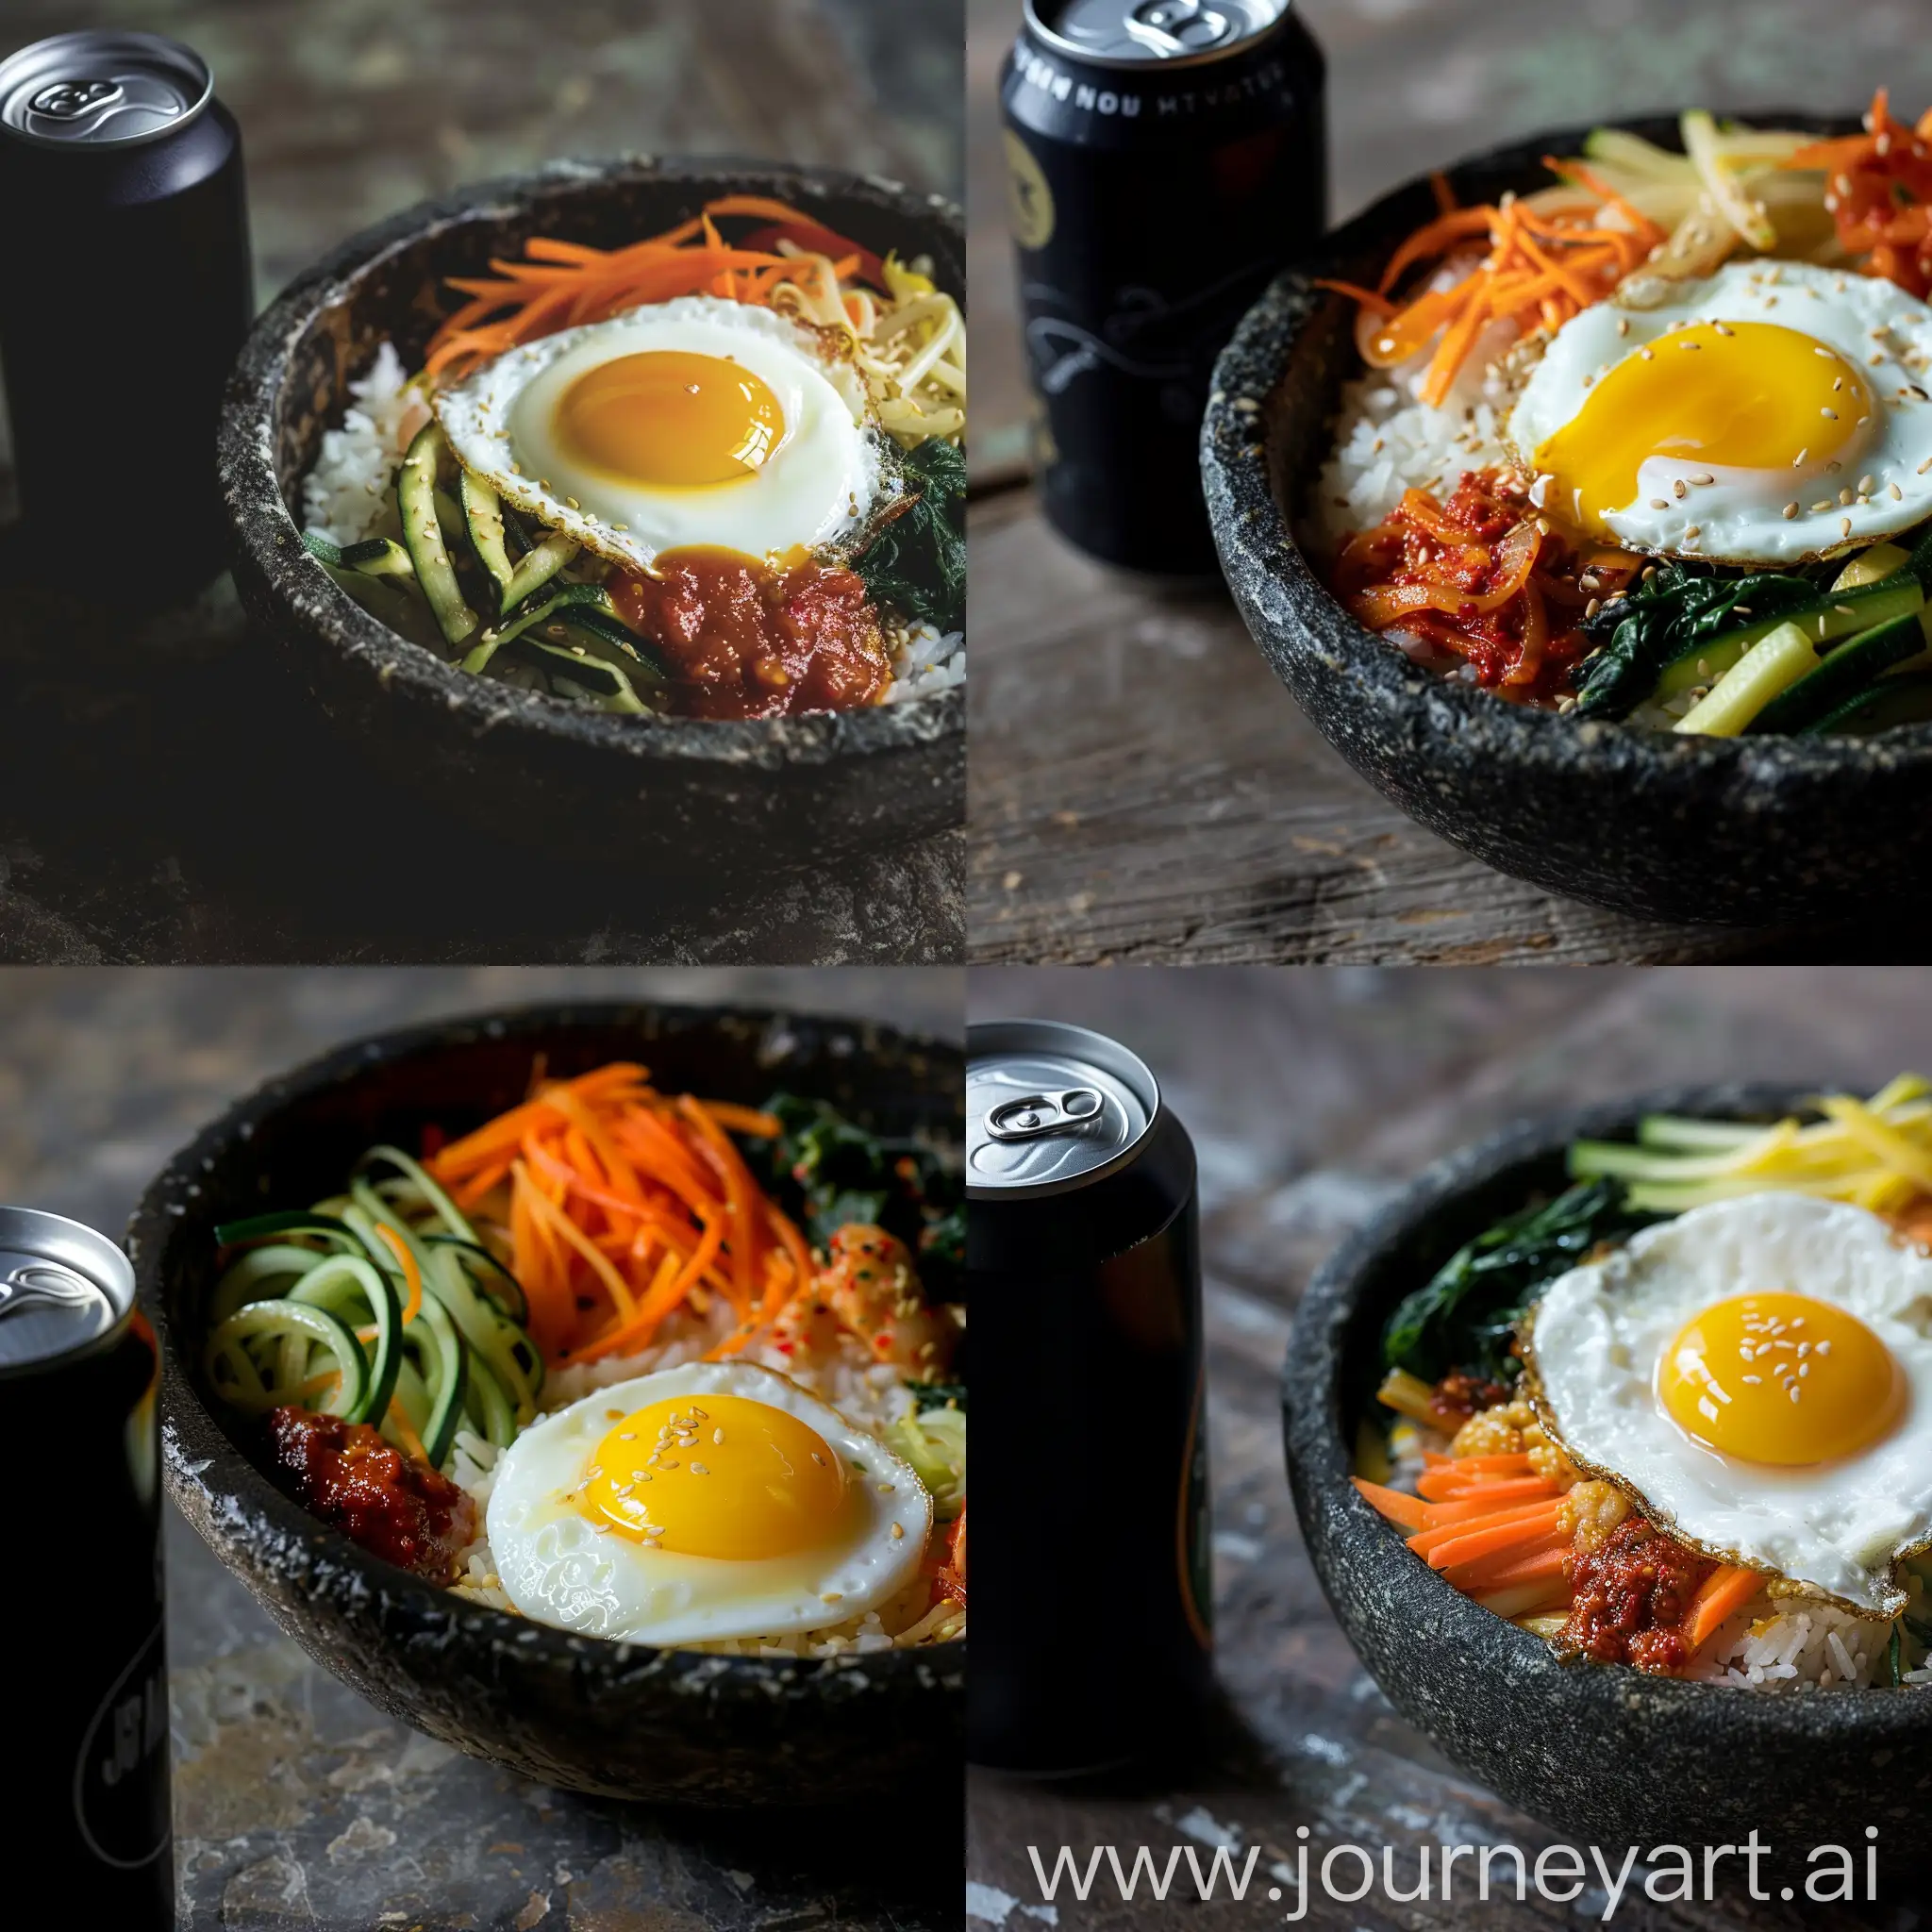 Rustic-Kitchen-Table-Setting-Bibimbap-and-Soft-Drink-Can